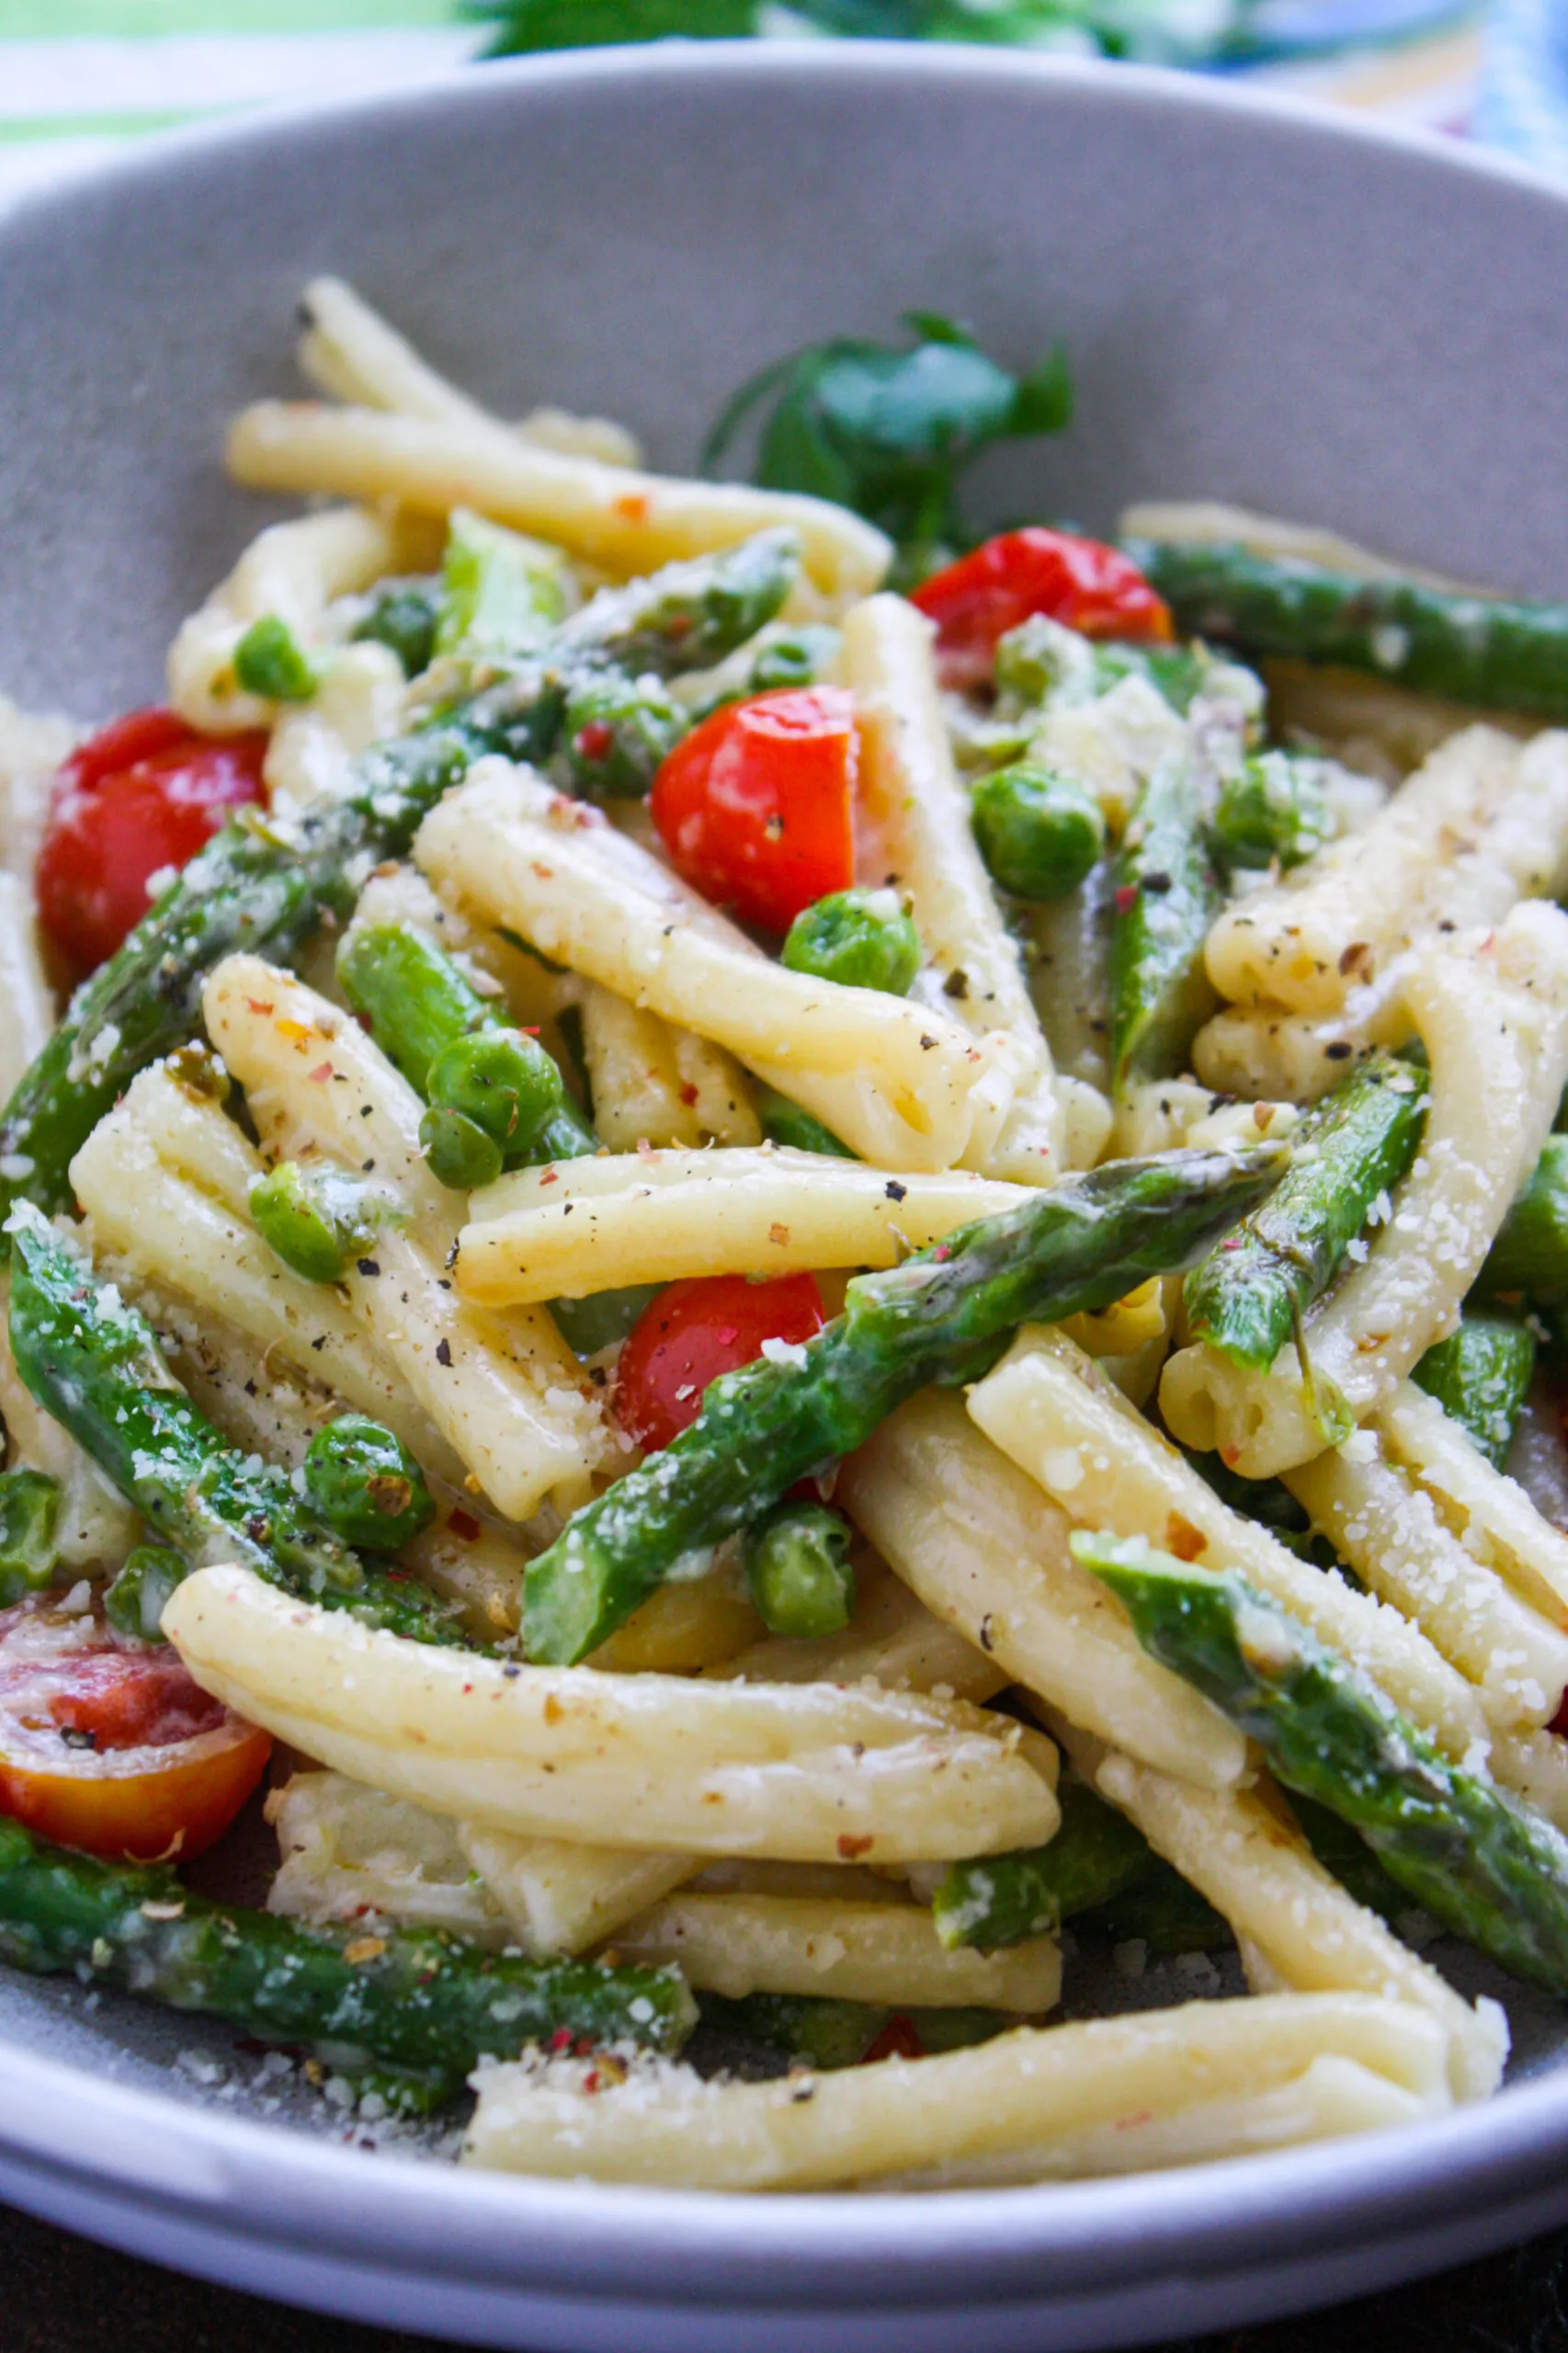 Pasta Primavera in Light Cream Sauce is a delight any night of the week.